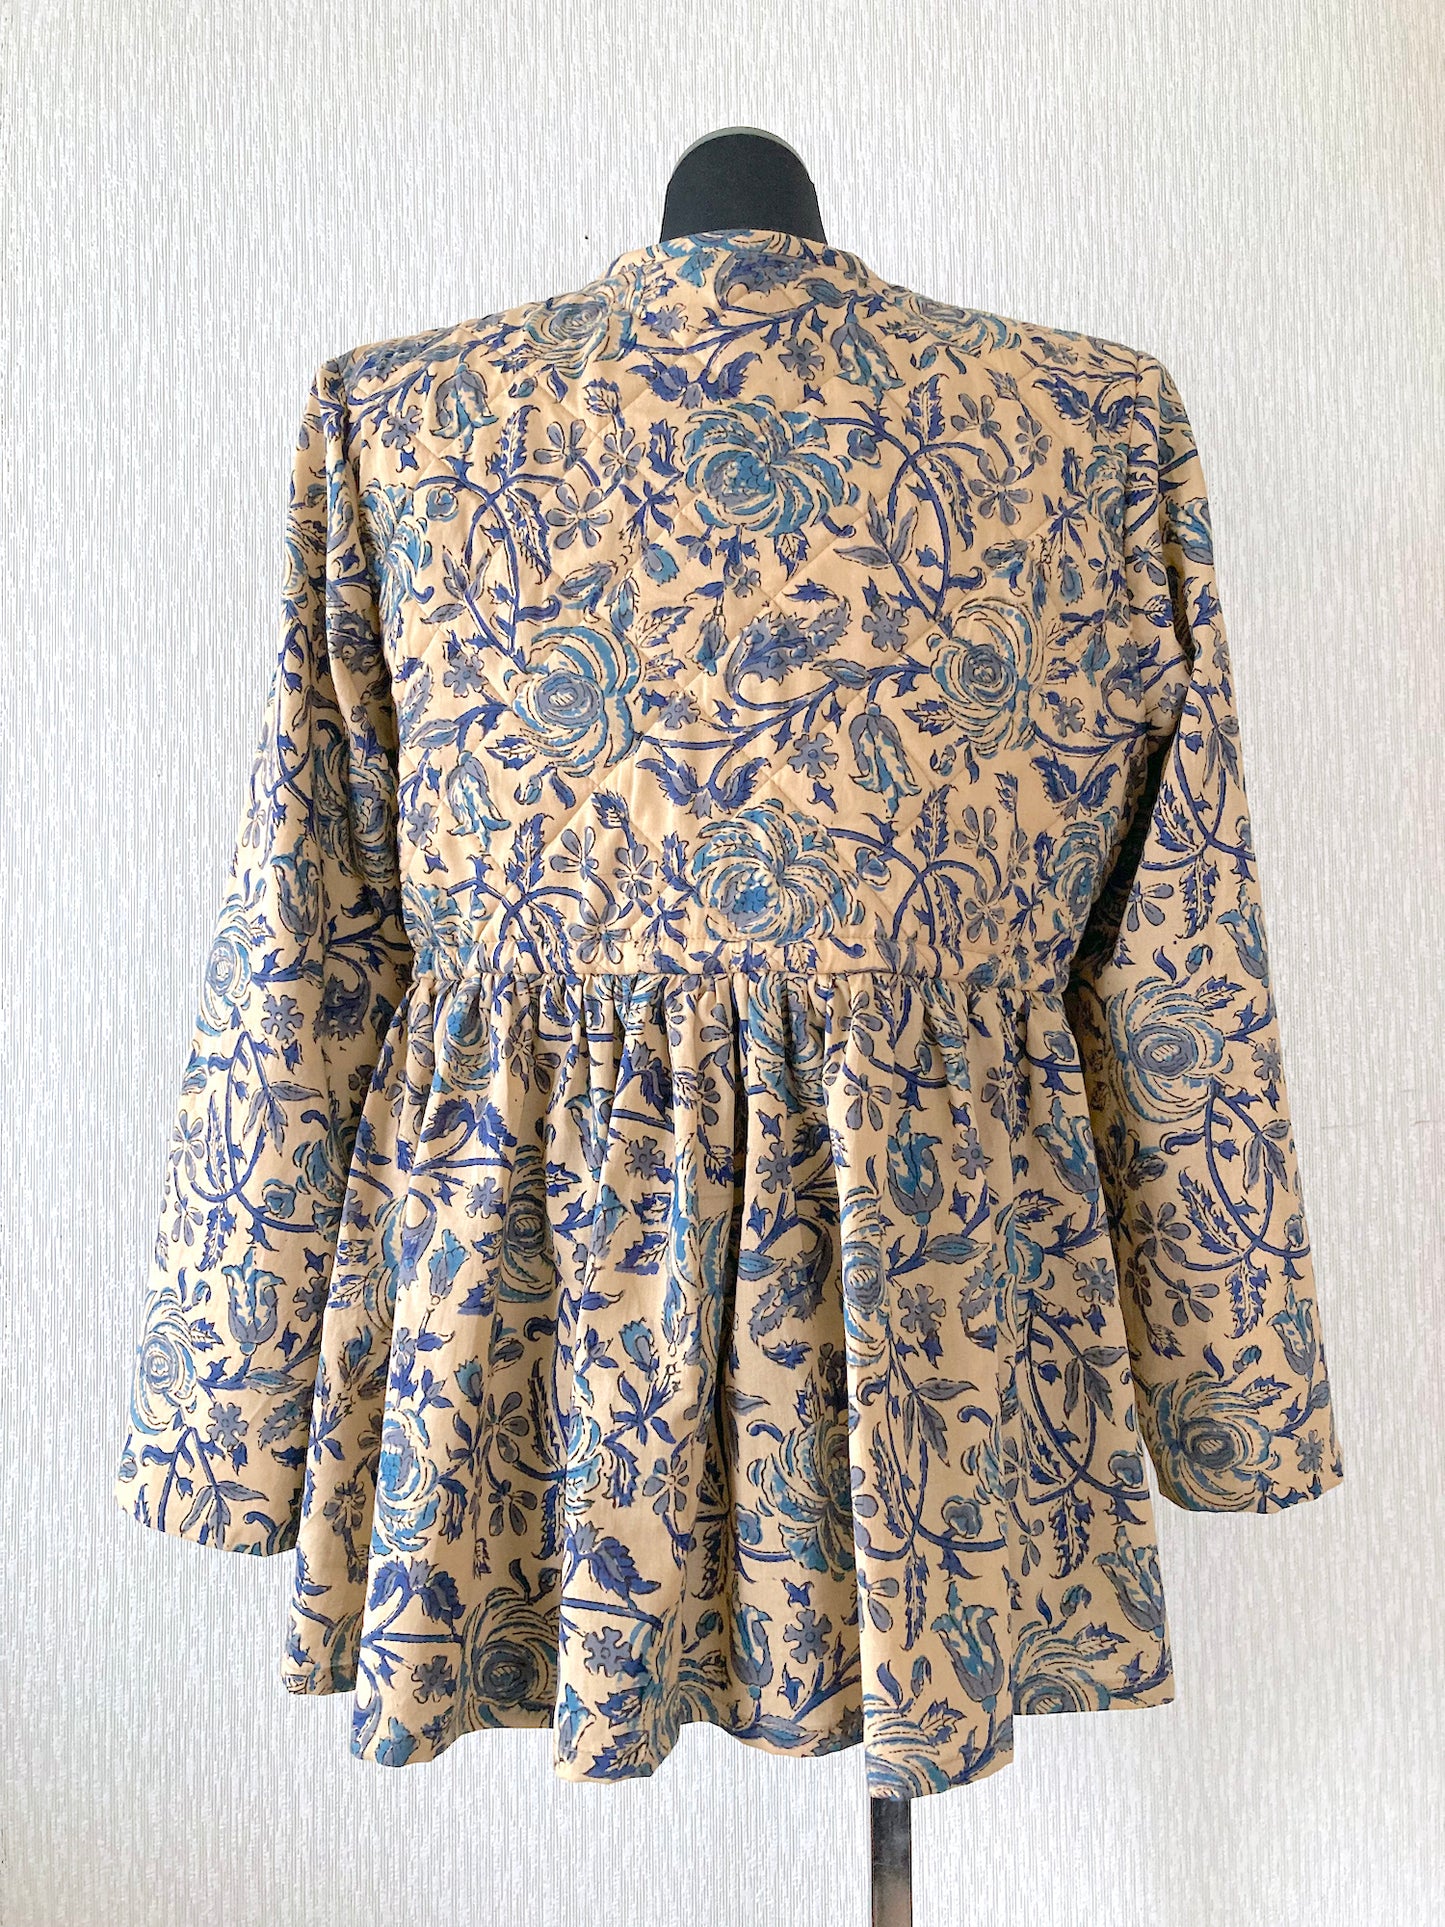 Hand Block Print Quilted Cardigan Jacket Blouse